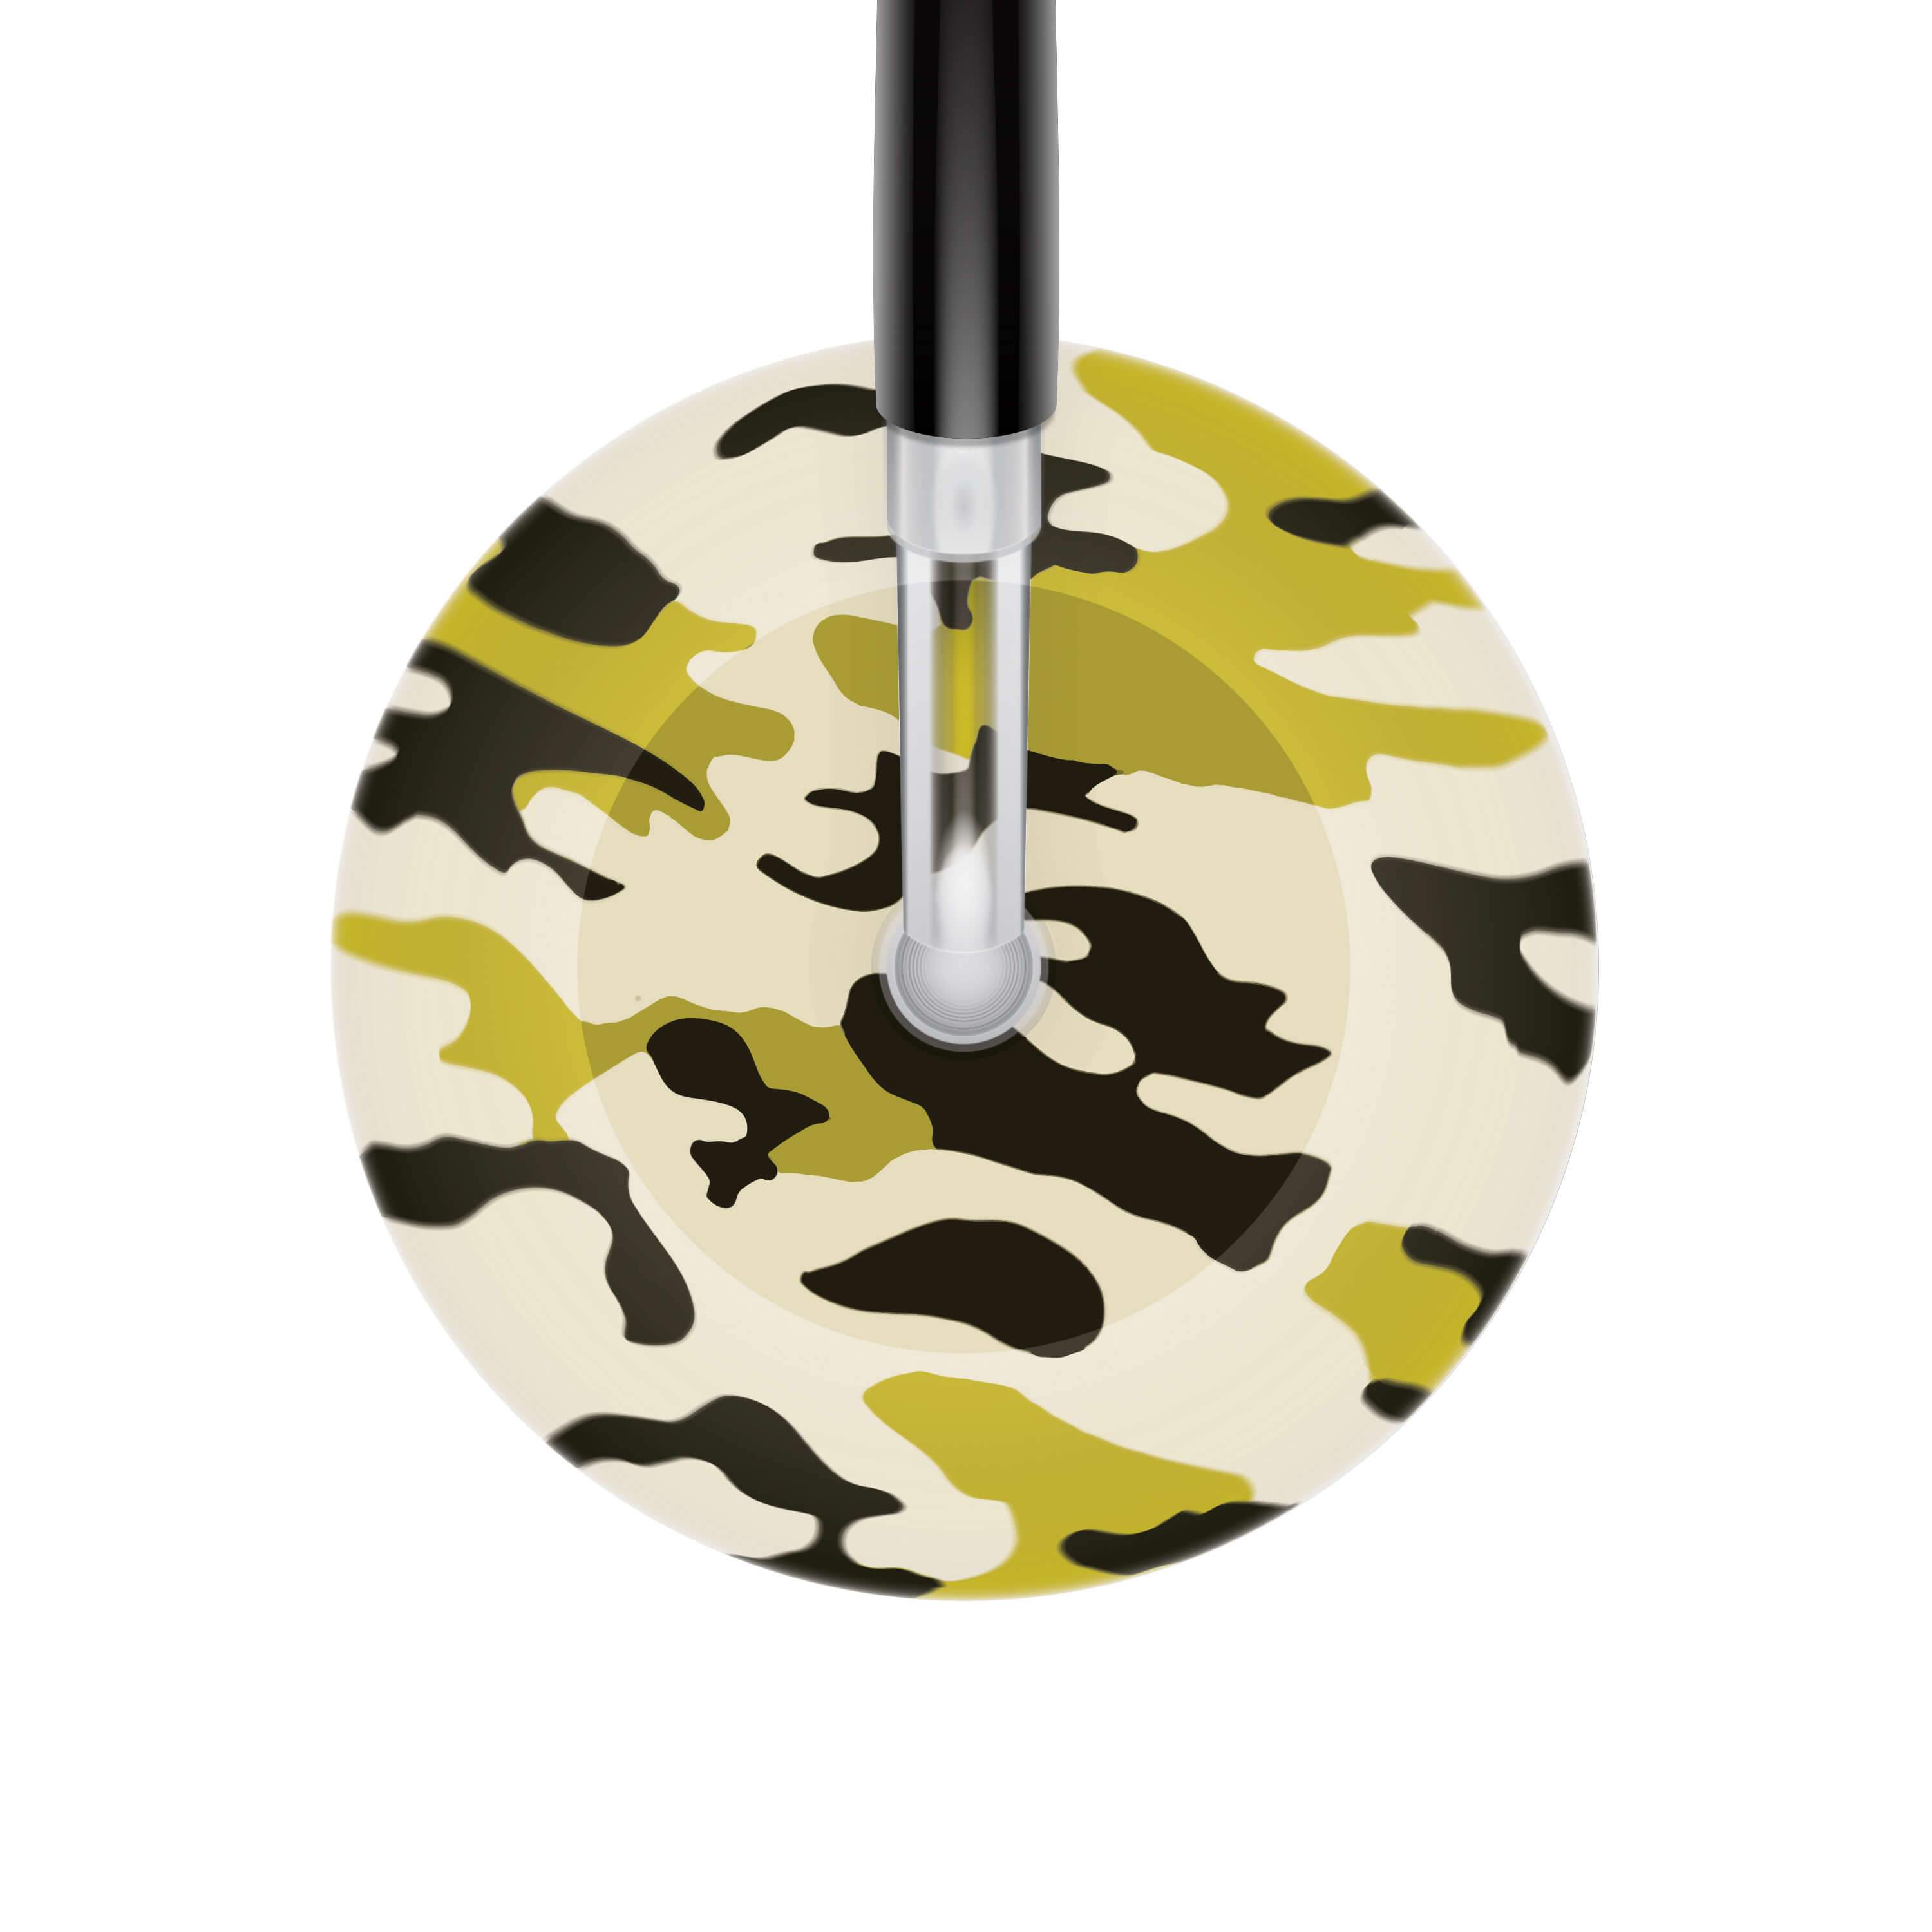 Camouflage Stethoscope - Green, Blue & Pink Camo Print - Ultrascope